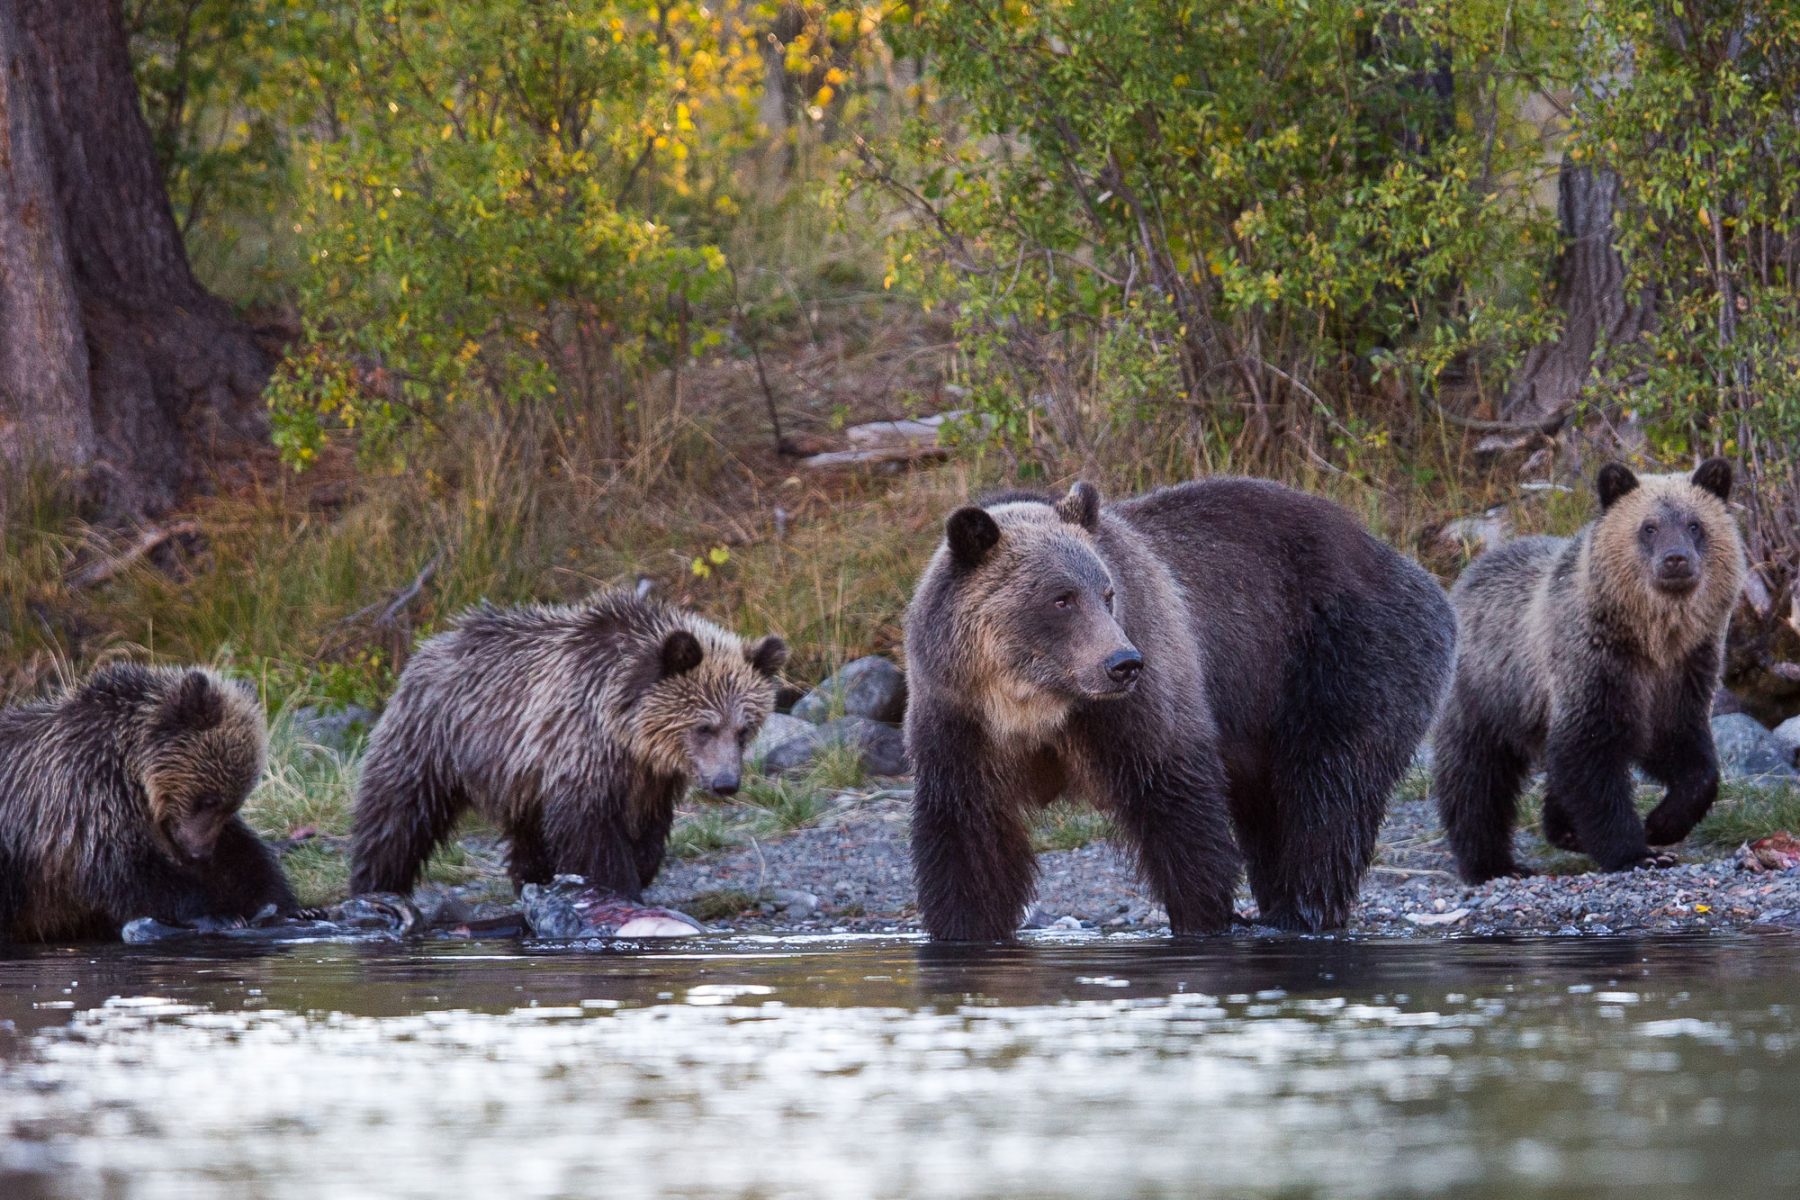 Grizzly bear family at water's edge